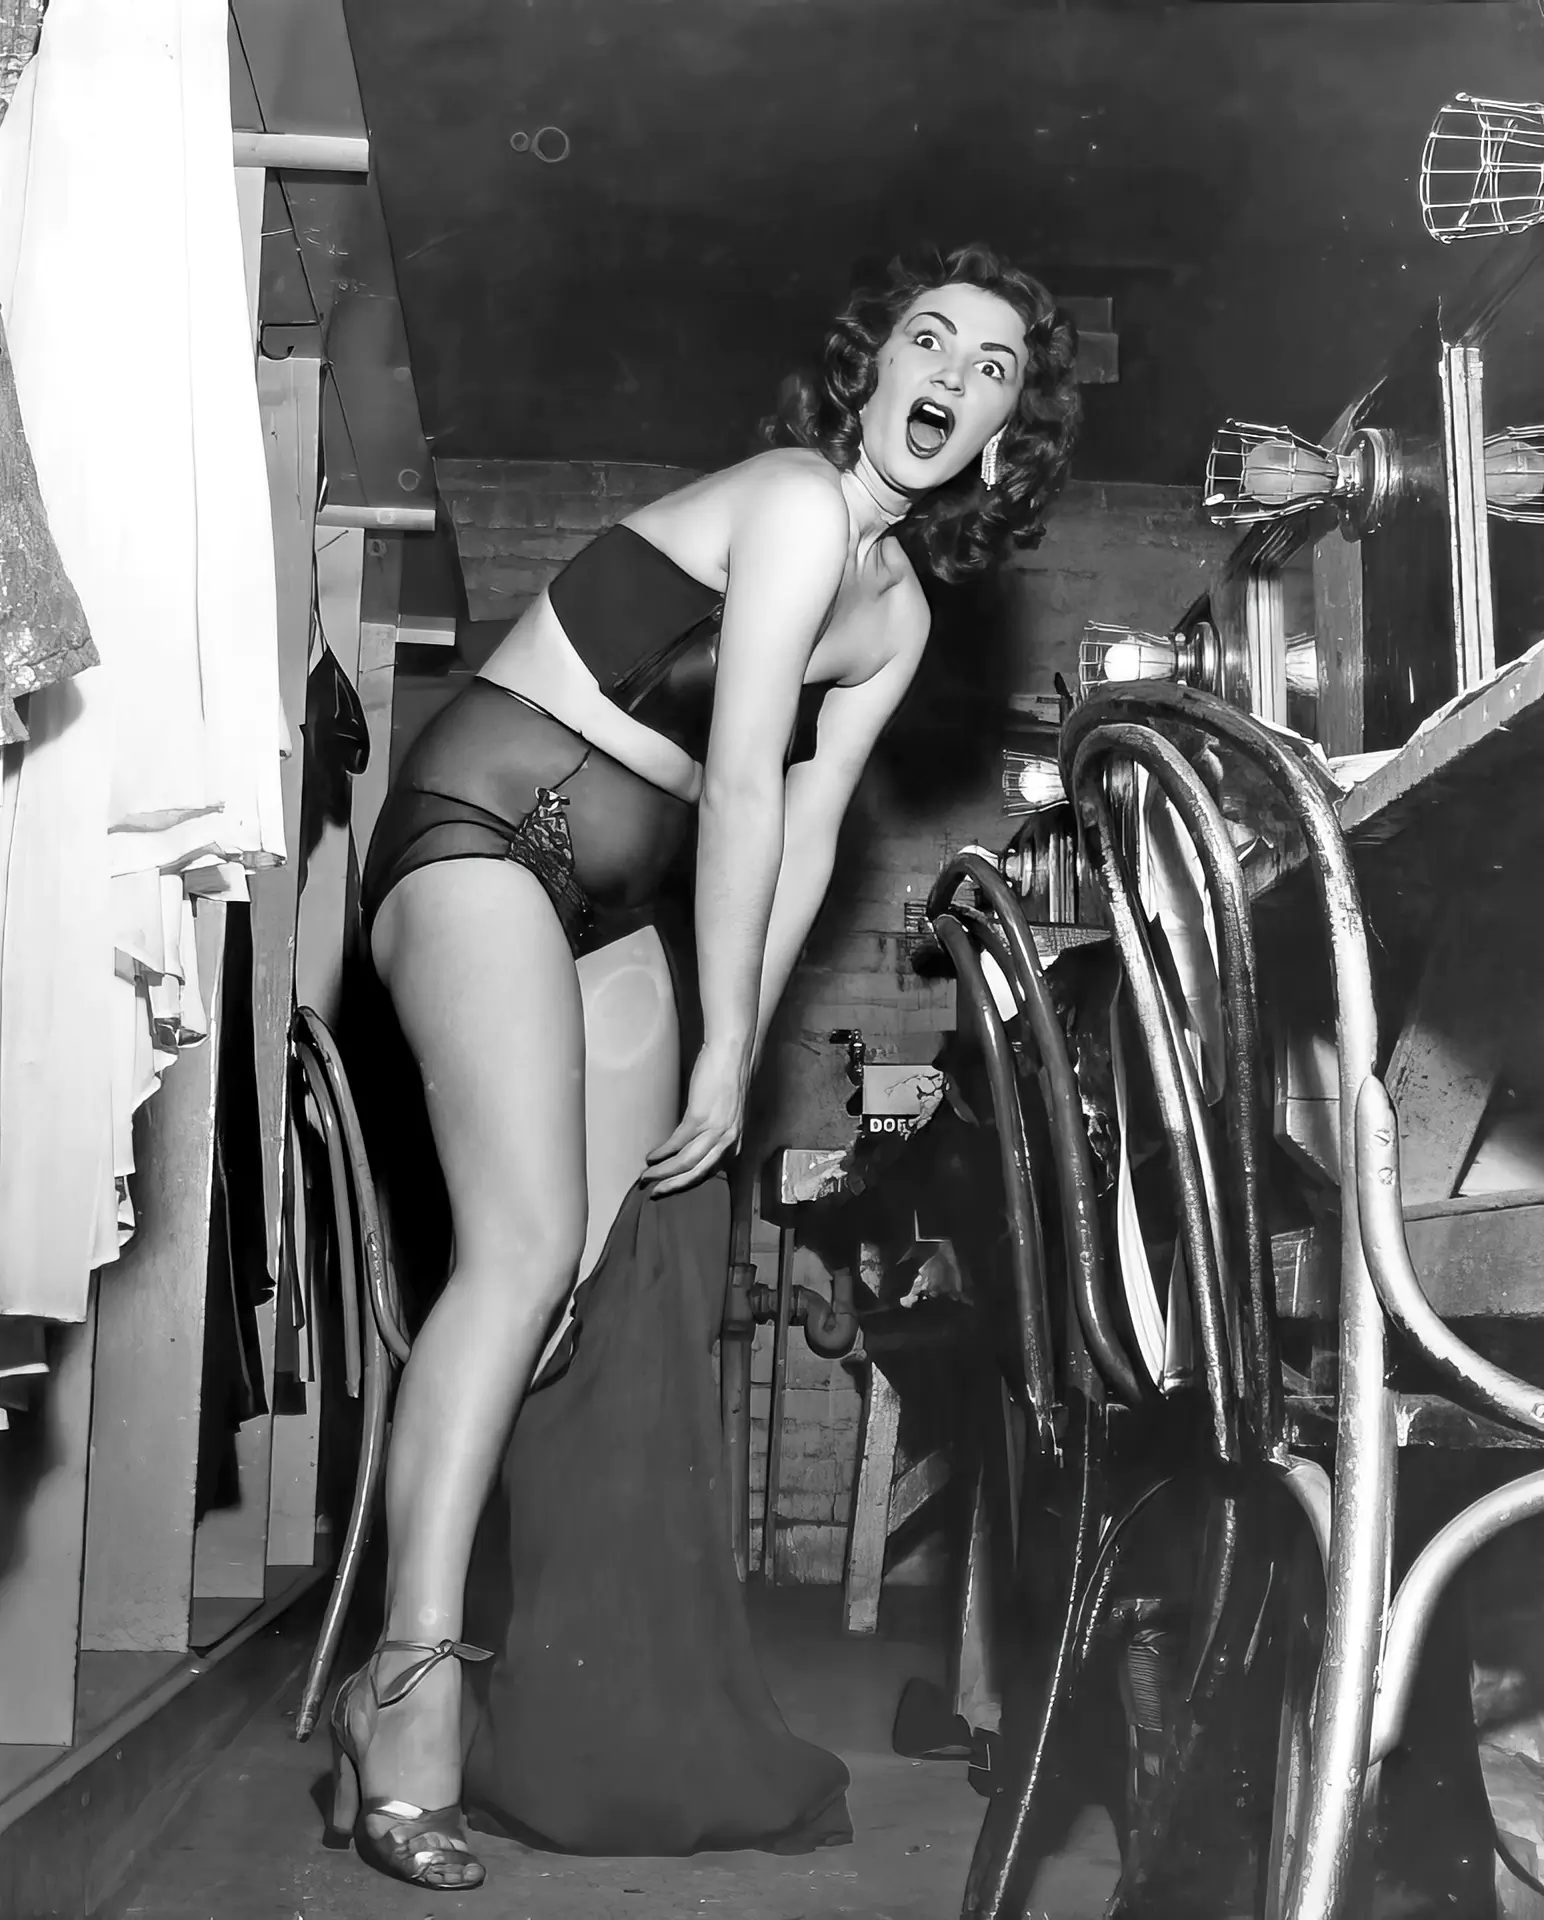 Surprised vintage burlesque dancer tries to put on her clothes